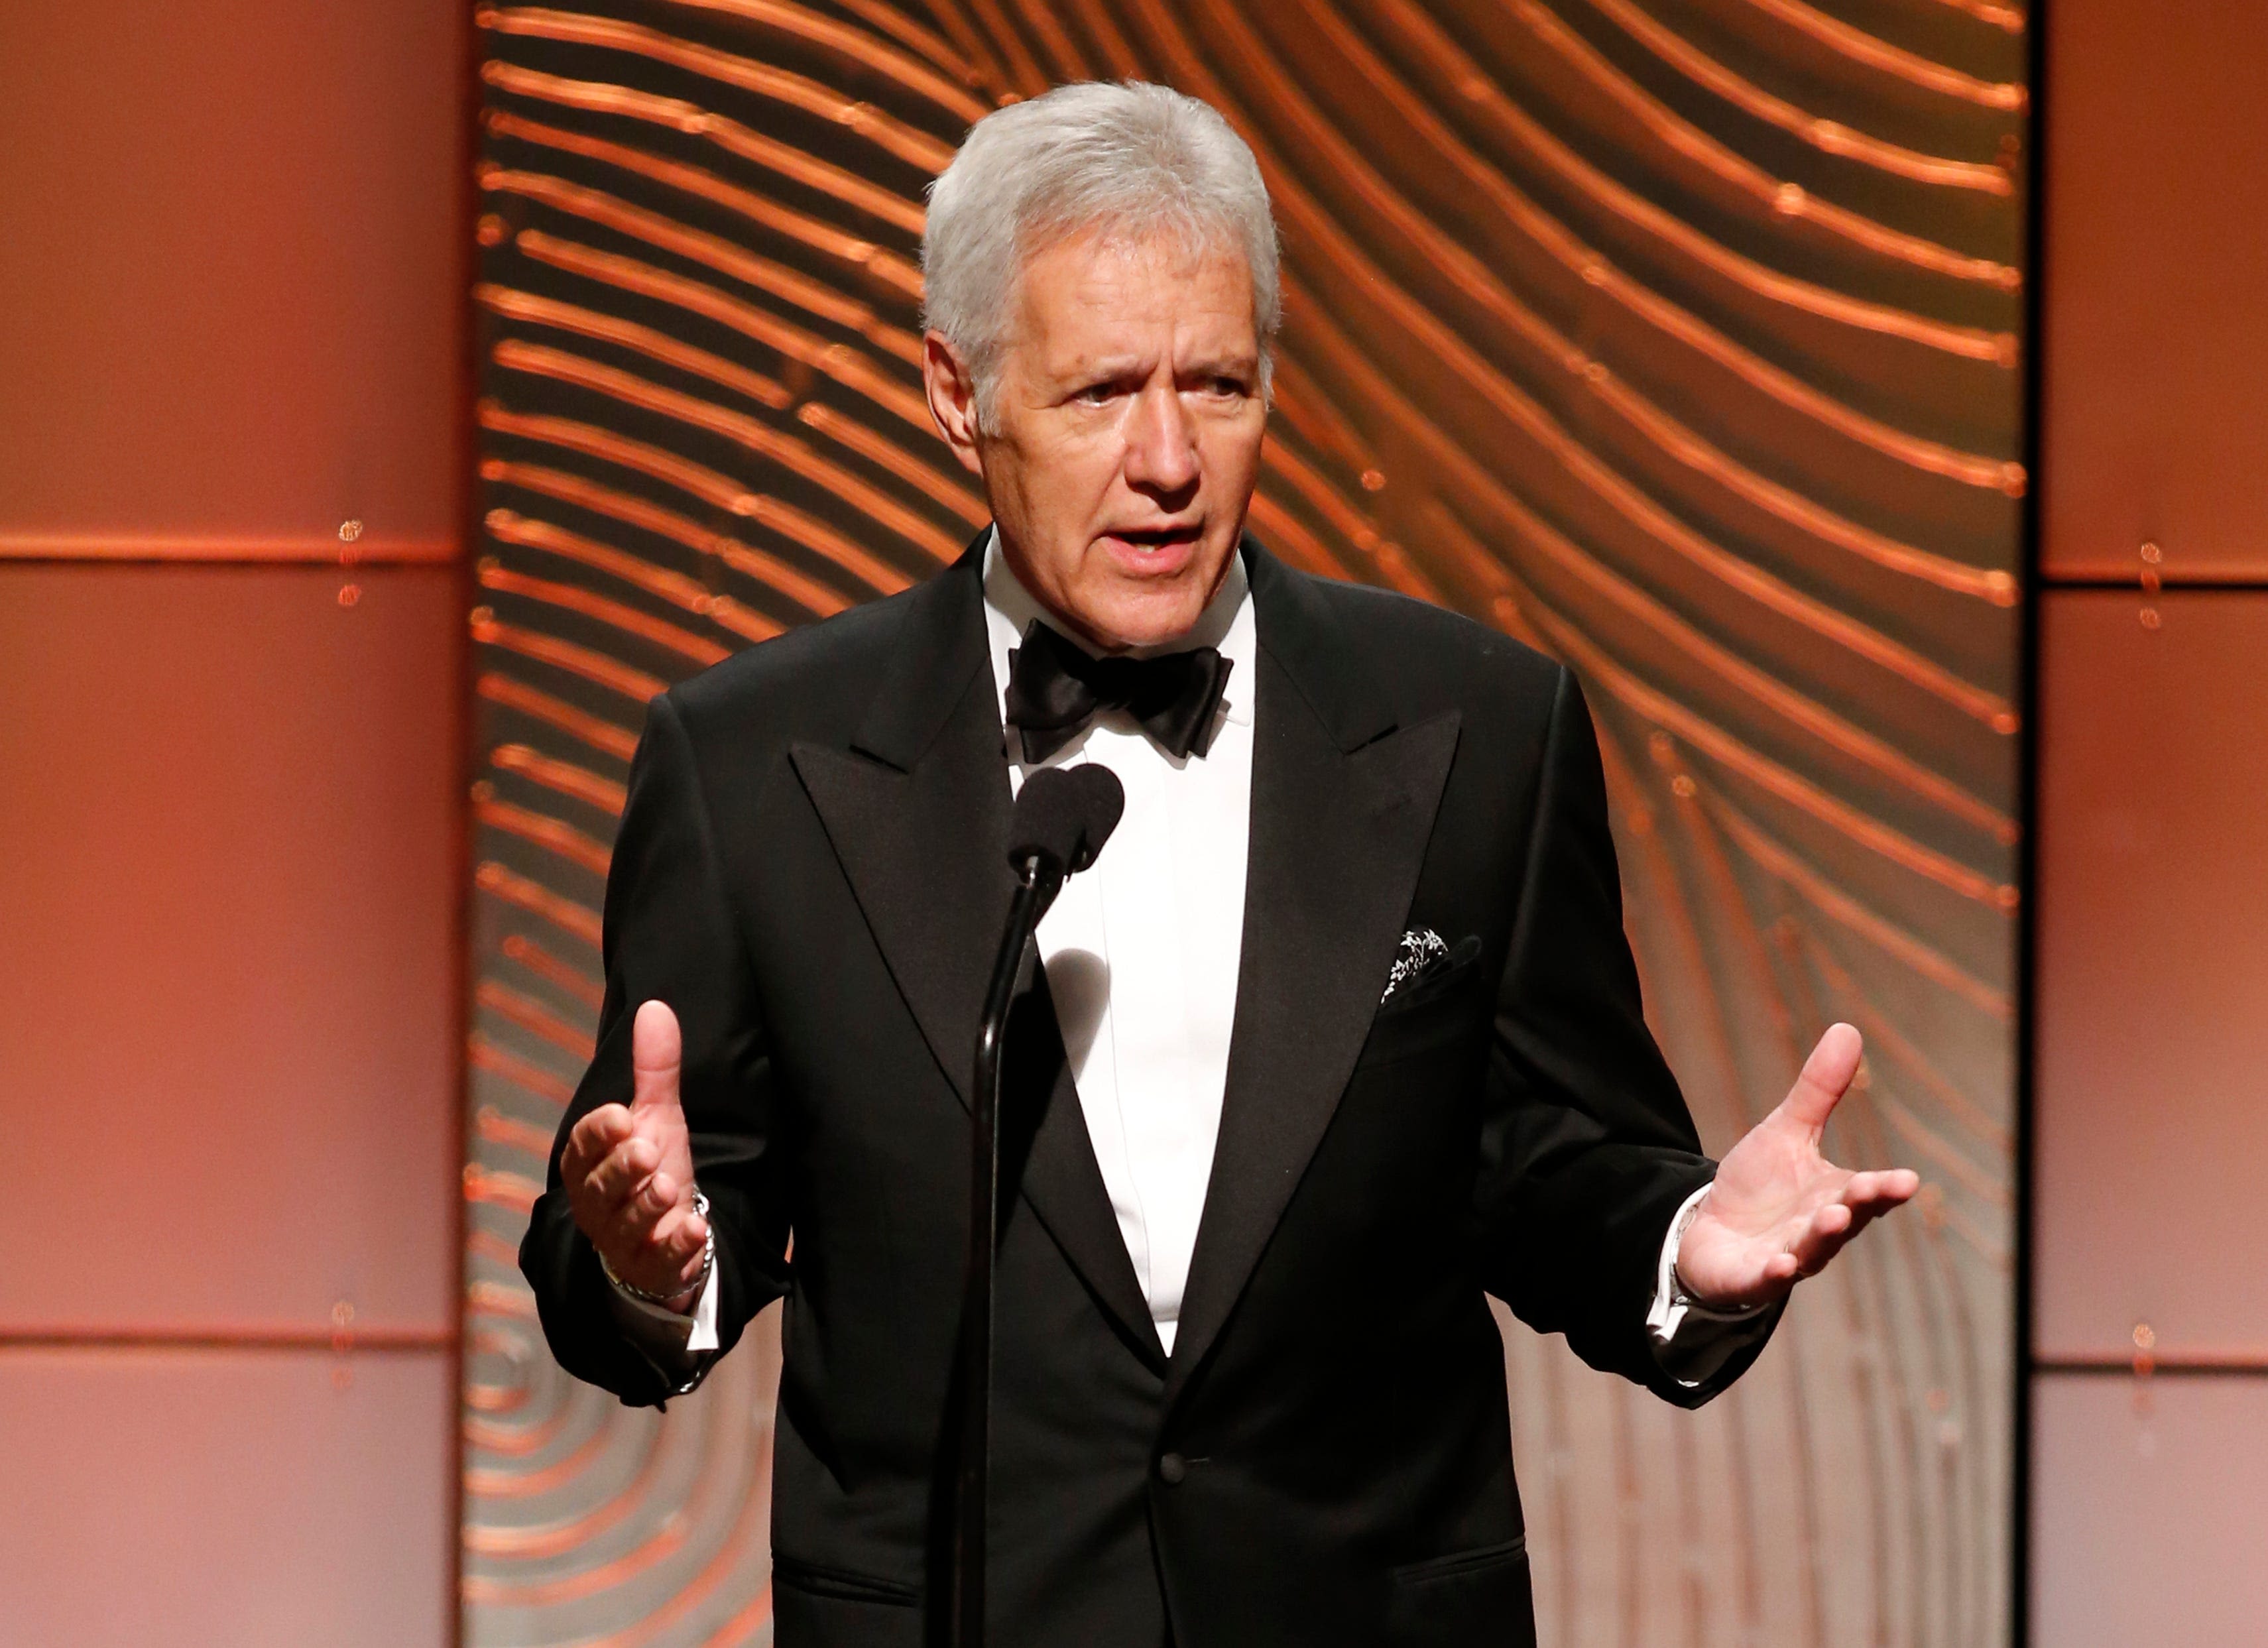 Iconic 'Jeopardy!' host Alex Trebek is honored with USPS Forever stamp. See it here.